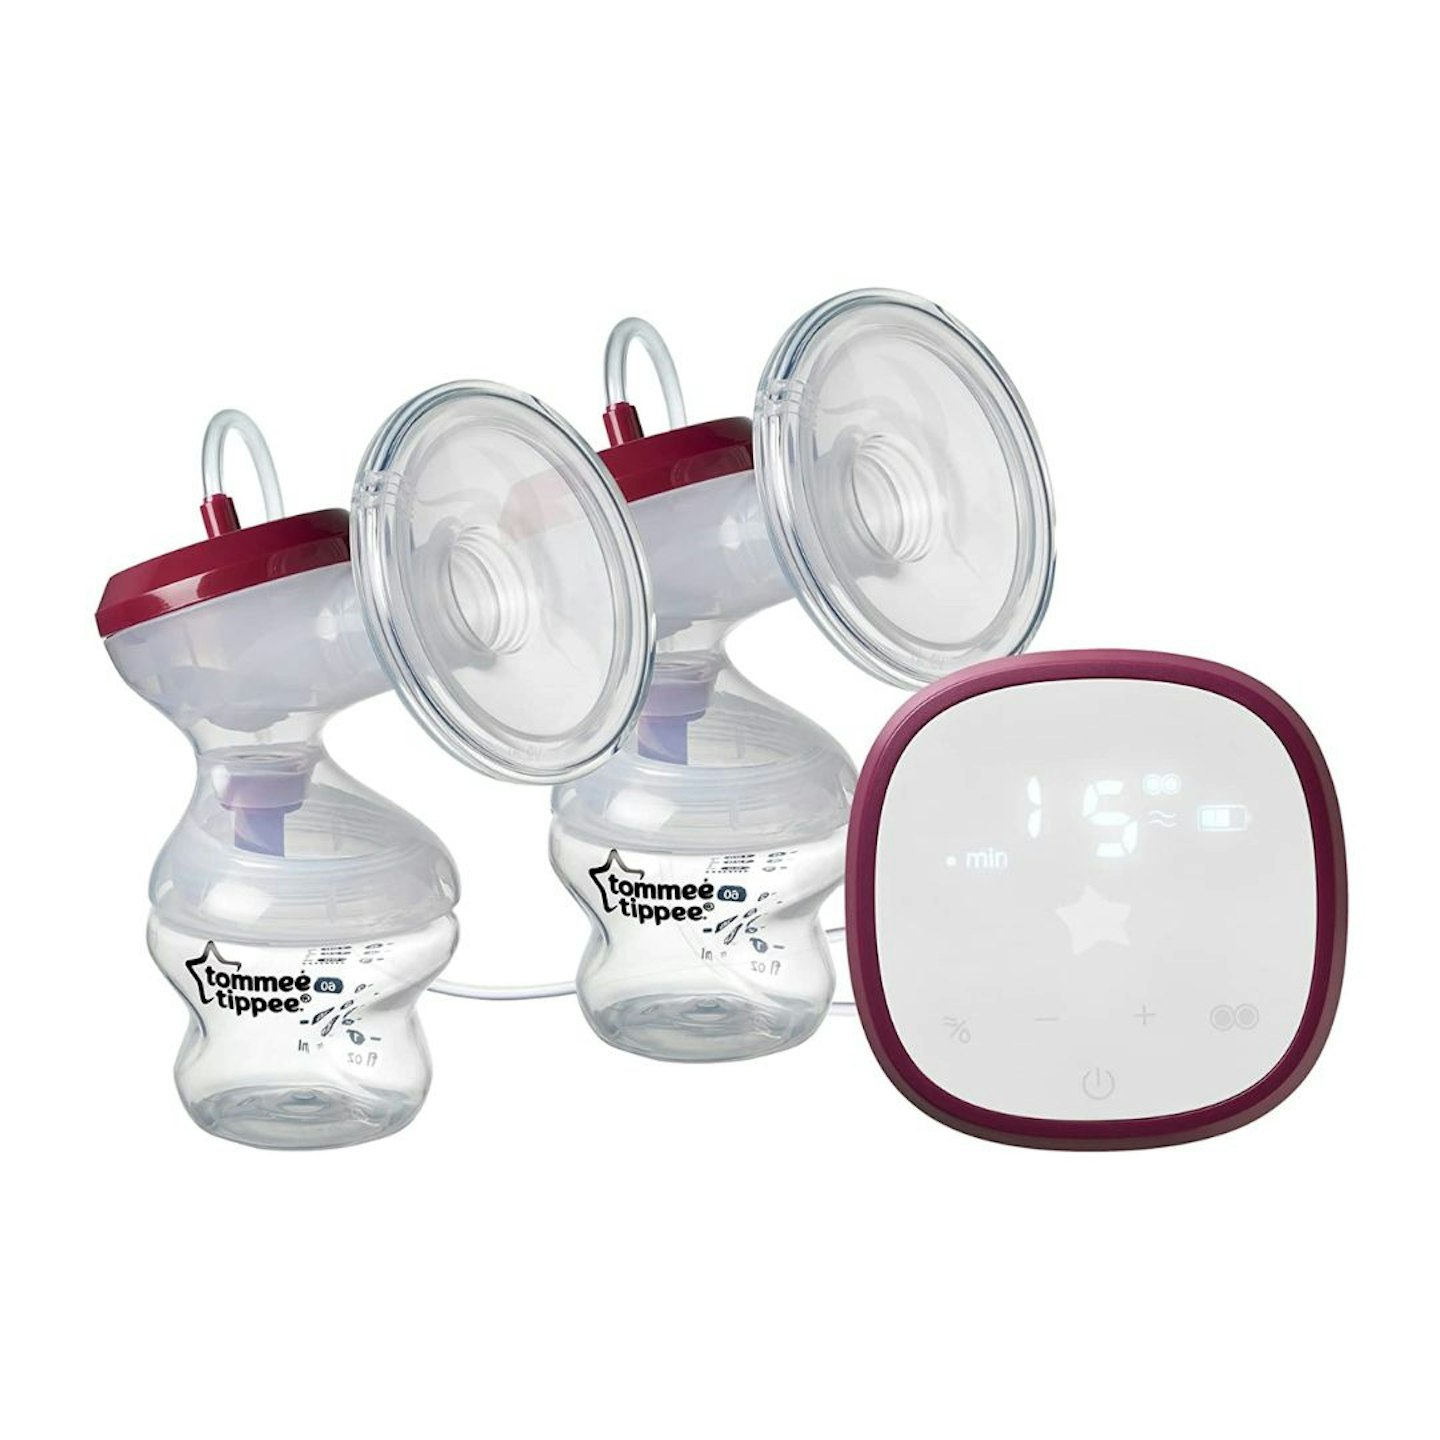  Tommee Tippee Made for Me Double Electric Breast Pump